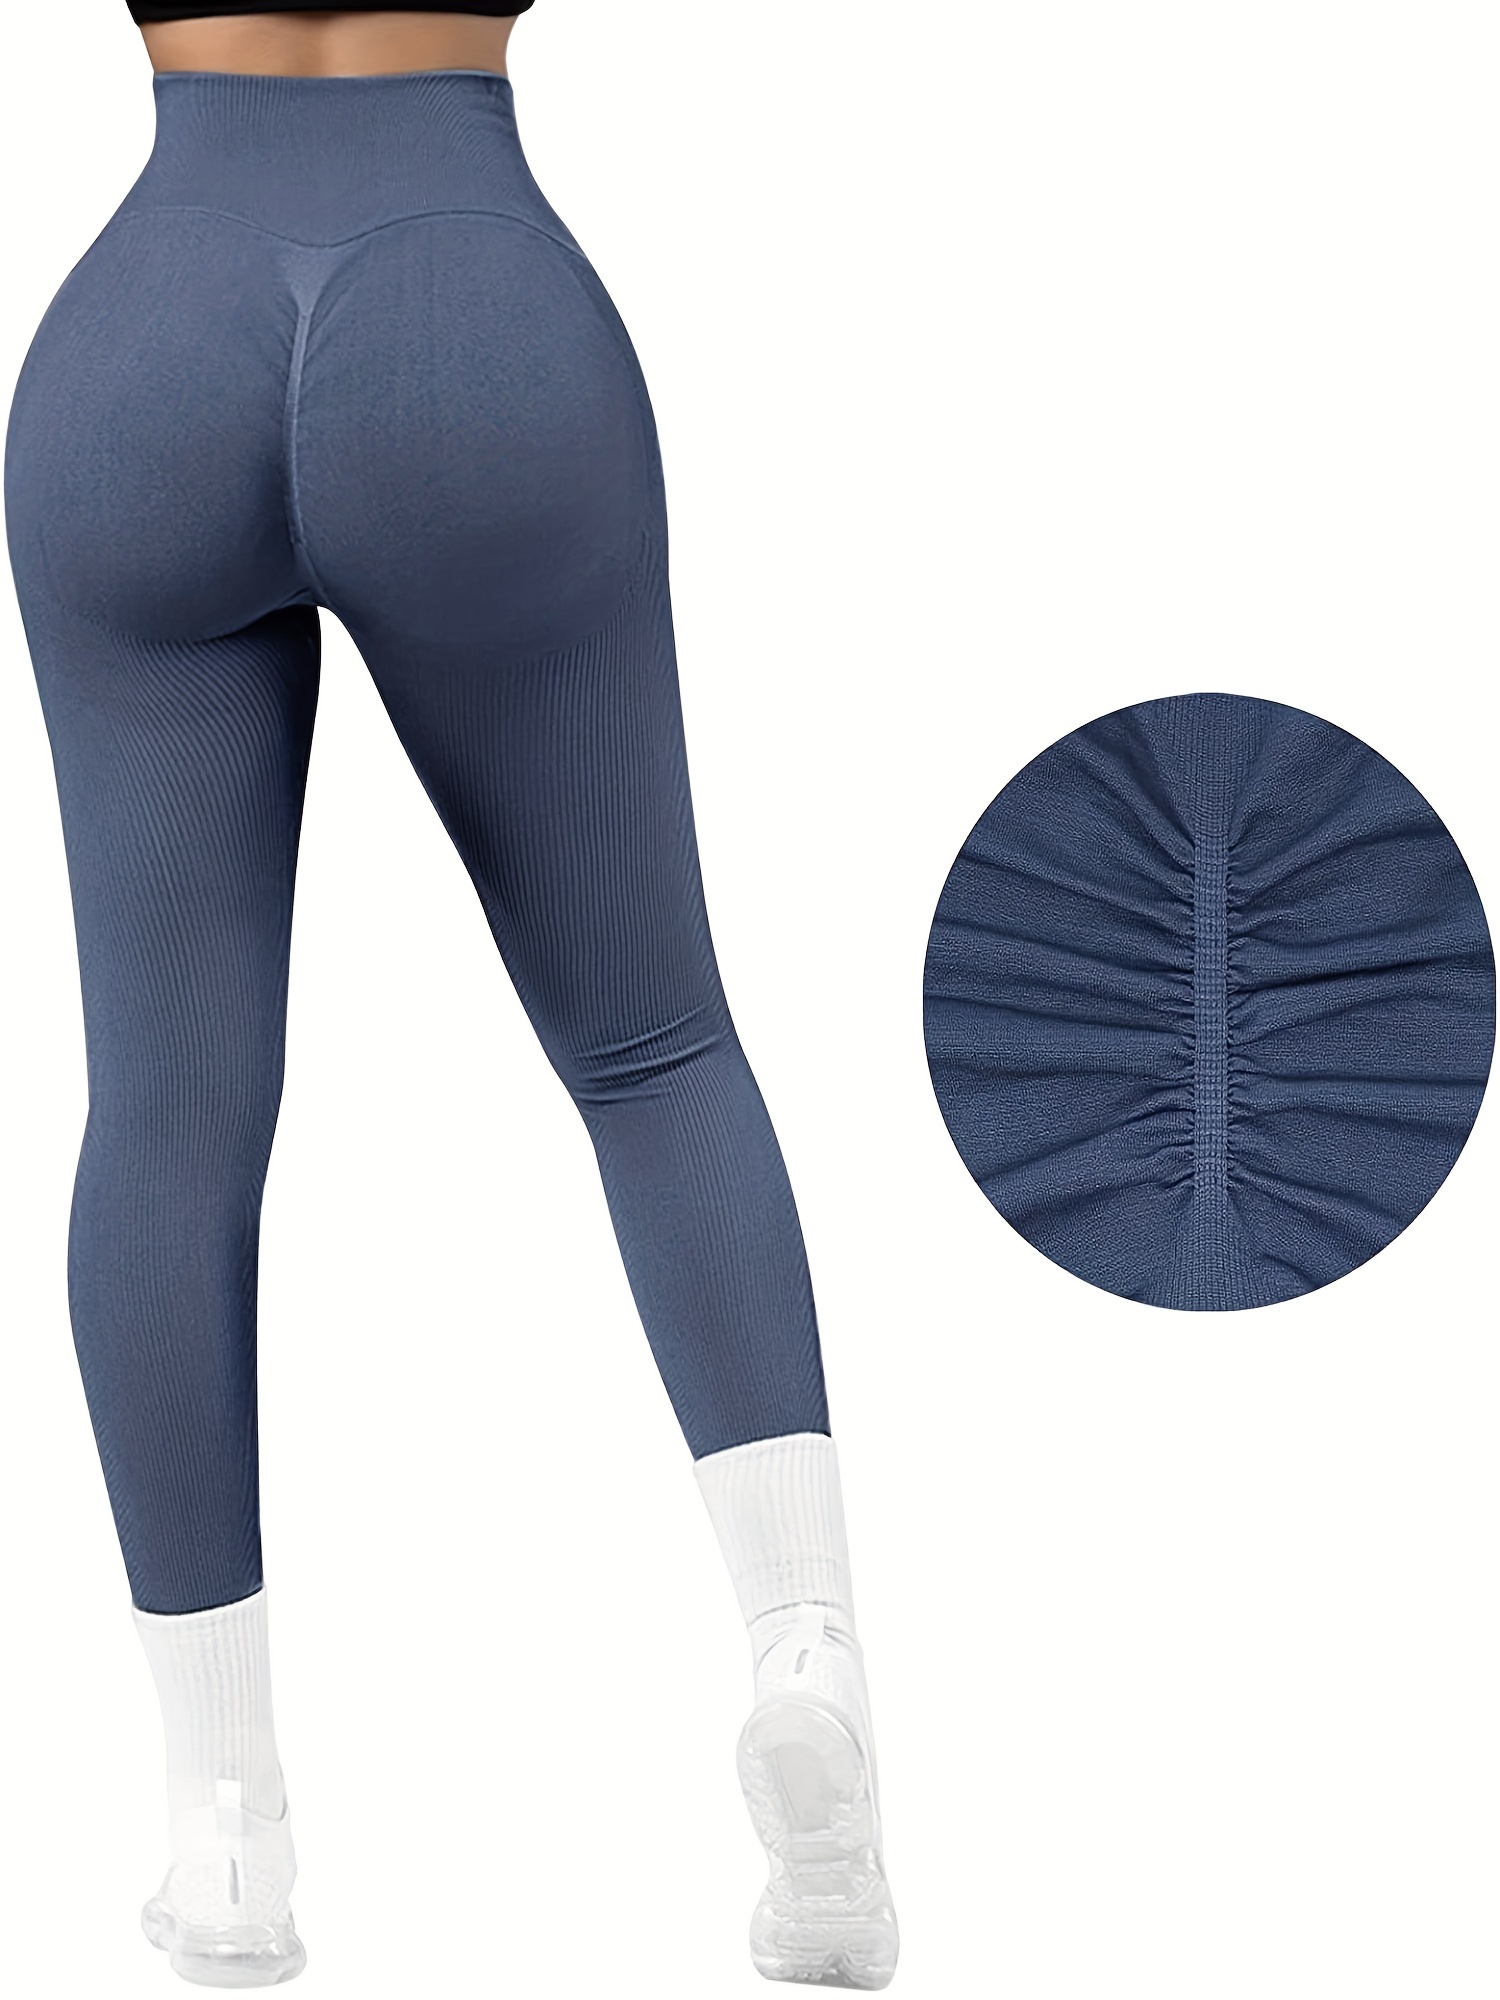 ALONG FIT High Waisted Tummy Control Leggings-Yoga-Pants with Pockets  Leggings for Women Workout Squat Proof Tights, Pants -  Canada